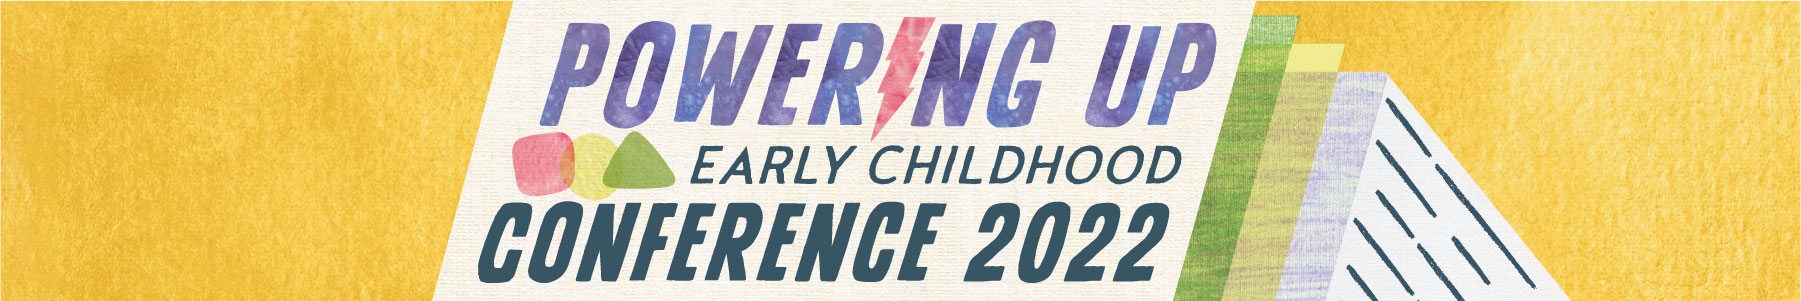 Powering Up Early Childhood Conference 2022